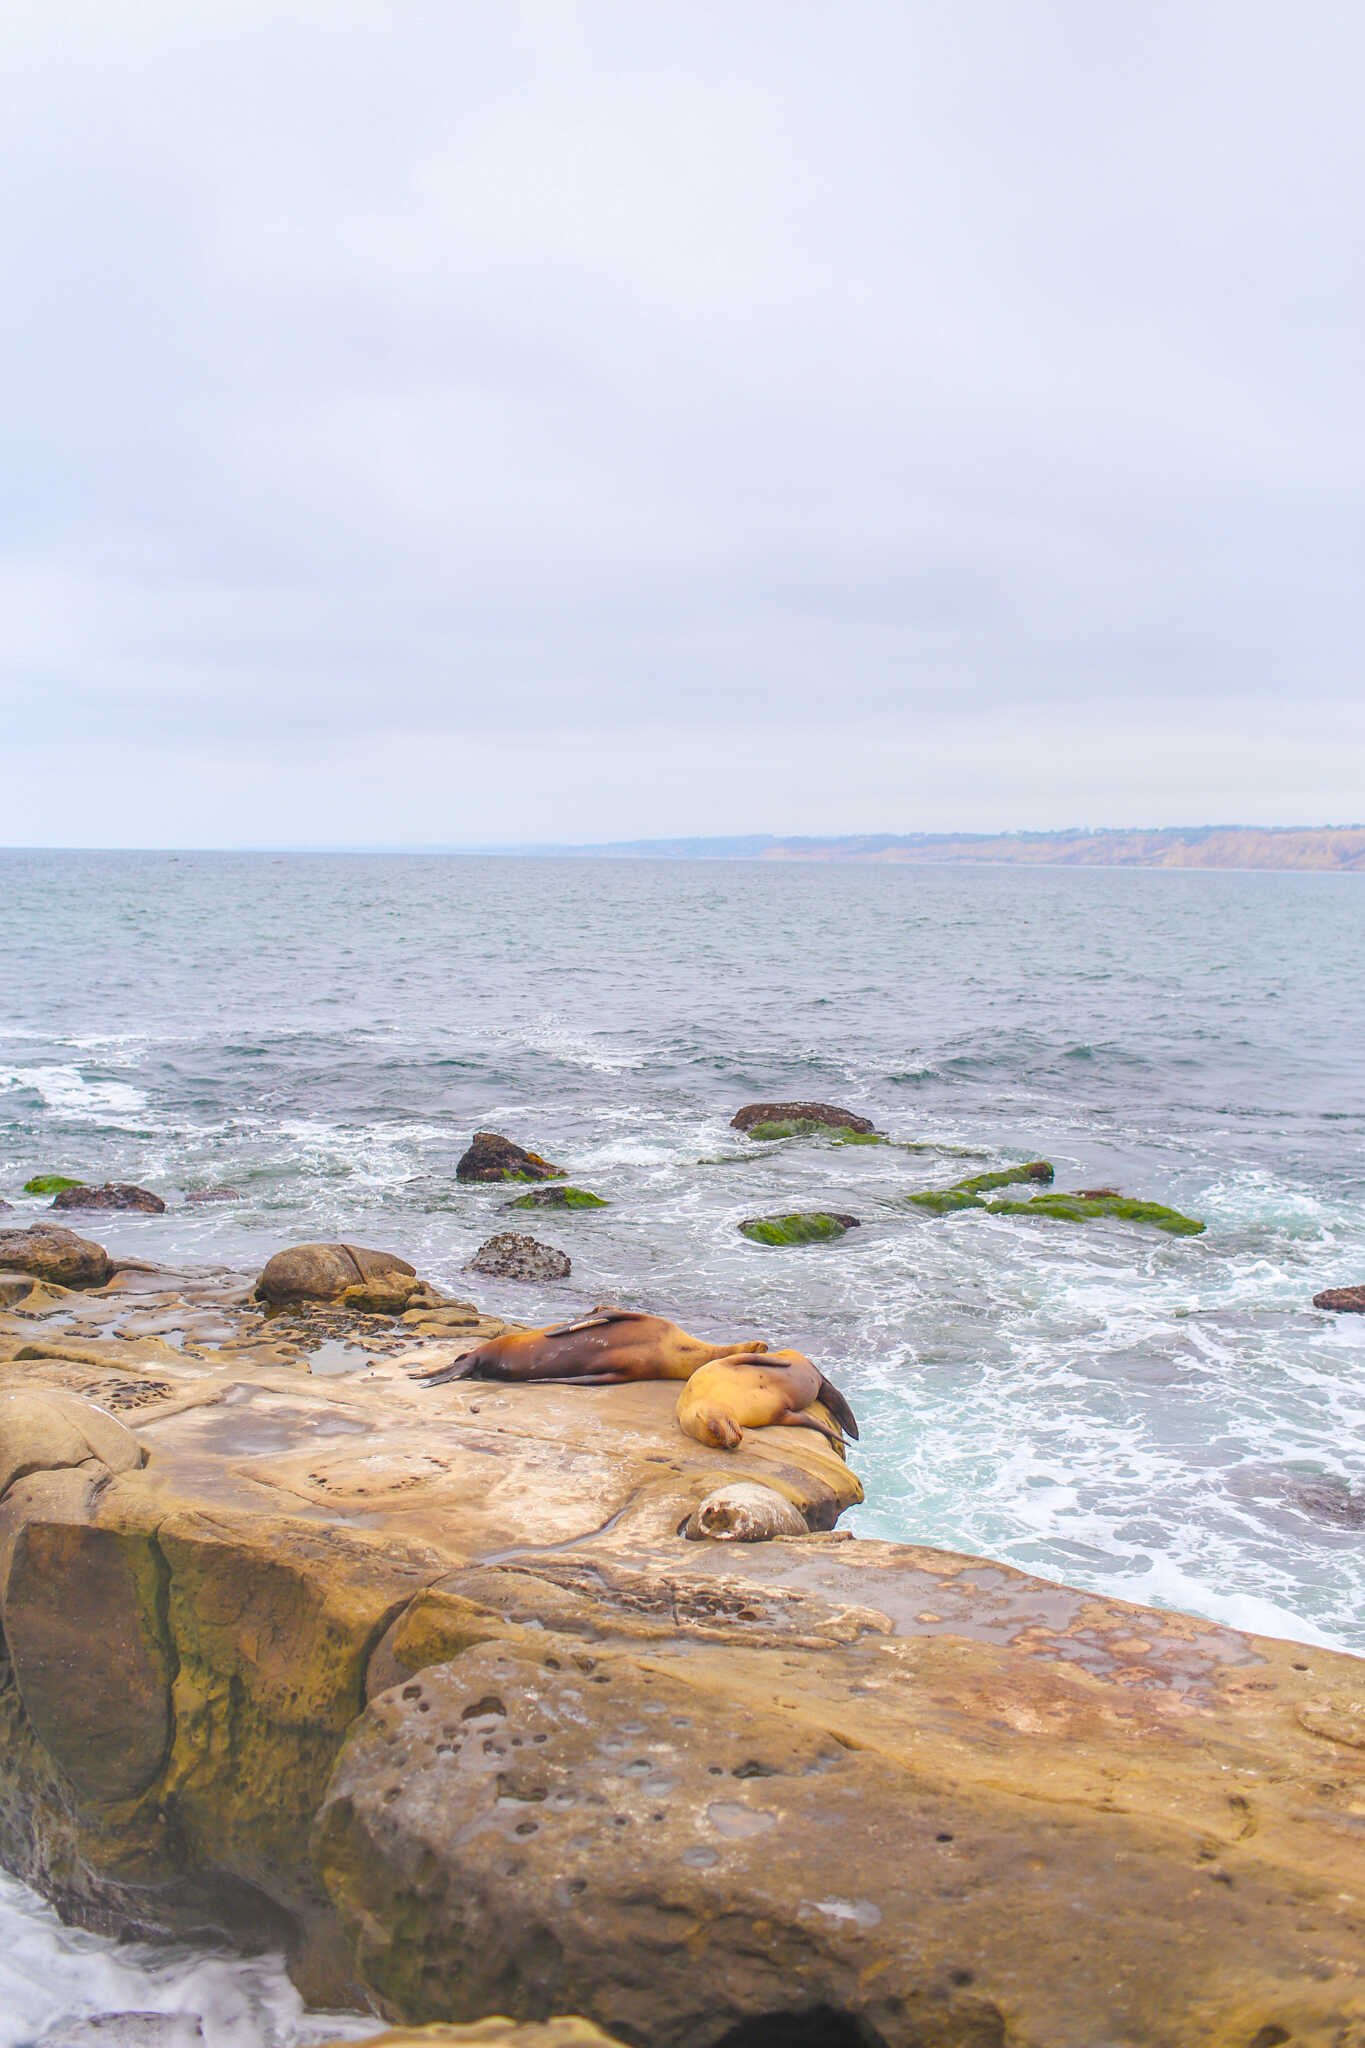 Weekend Guide to La Jolla - Top Things to Do in 48 Hours